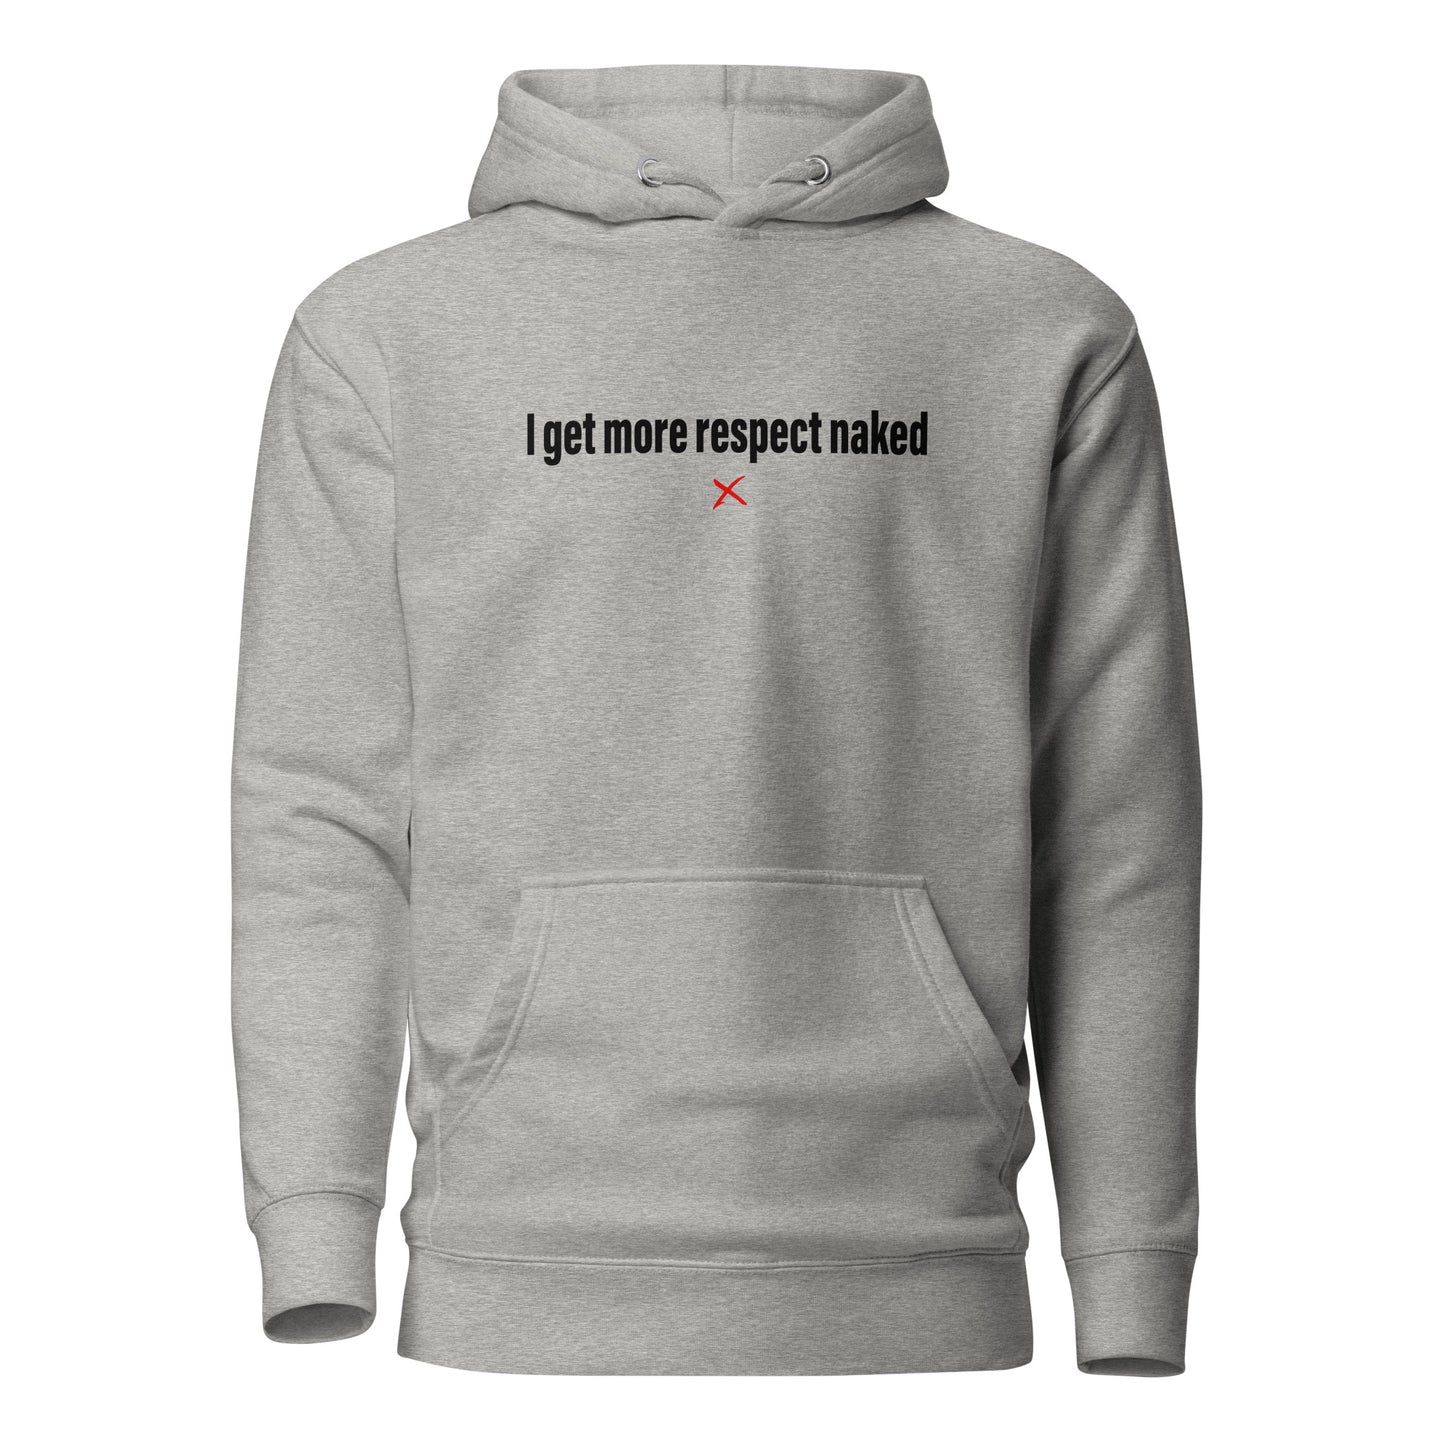 I get more respect naked - Hoodie